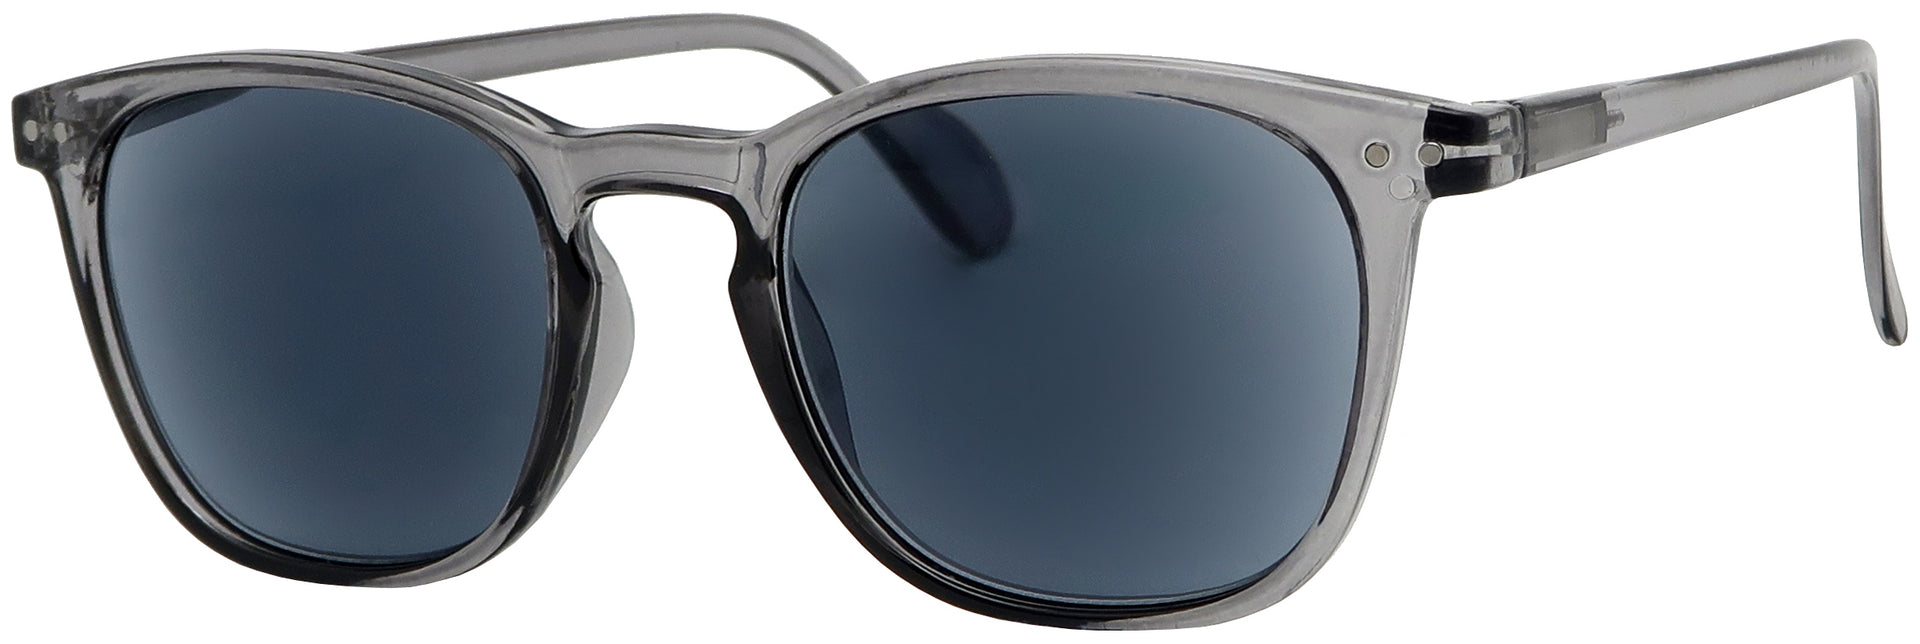 ST1641PL - Wholesale Round Style Polarized Sunglasses with Spring Hinged Temples in Grey